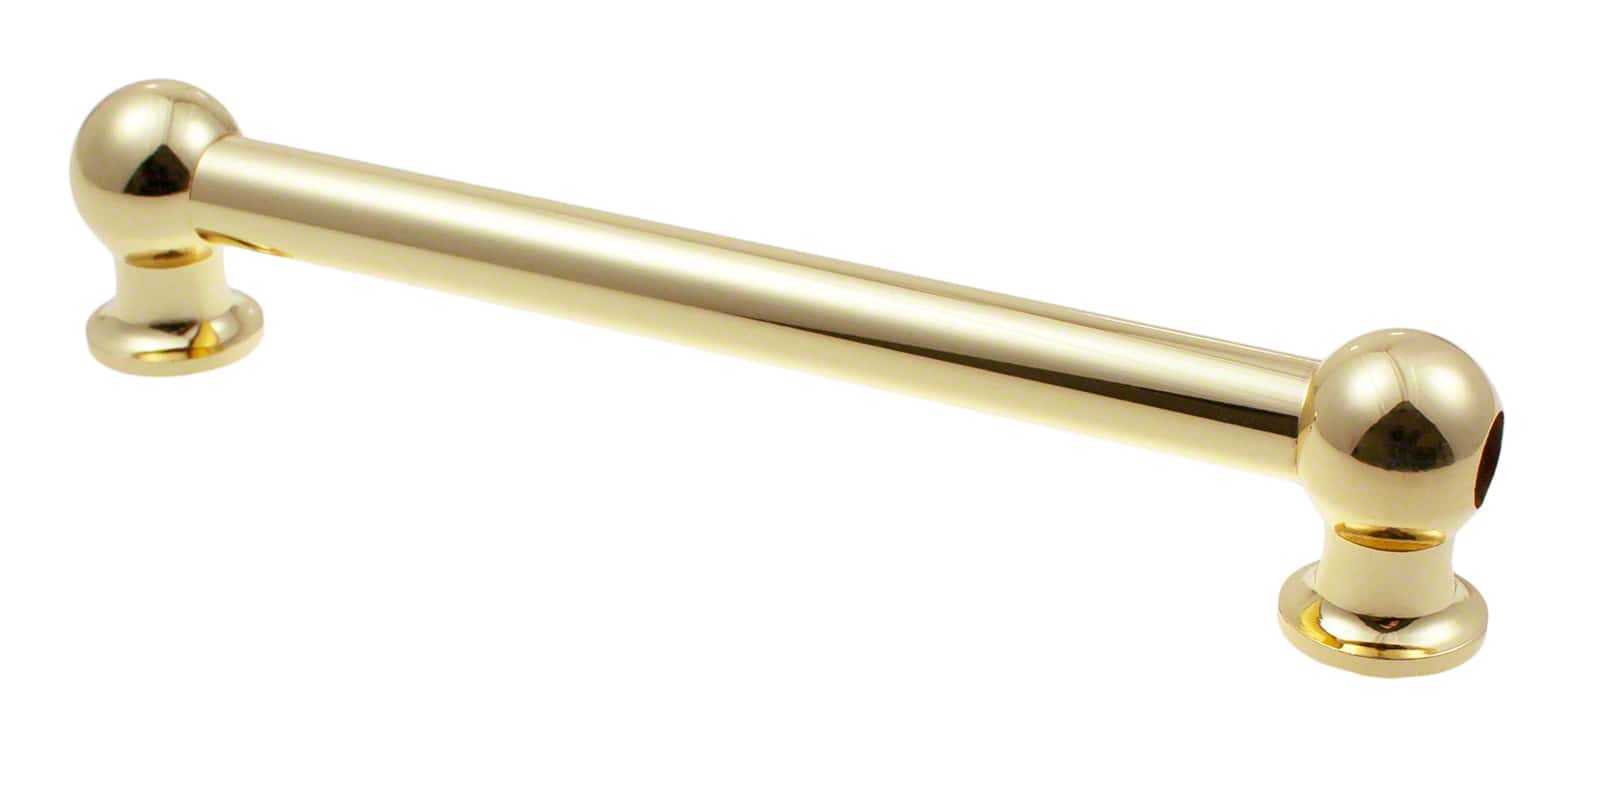 SPAREDRUM TL1D89-BR - TUBE LUG BRASS - 89MM - DOUBLE ENDED (X1)